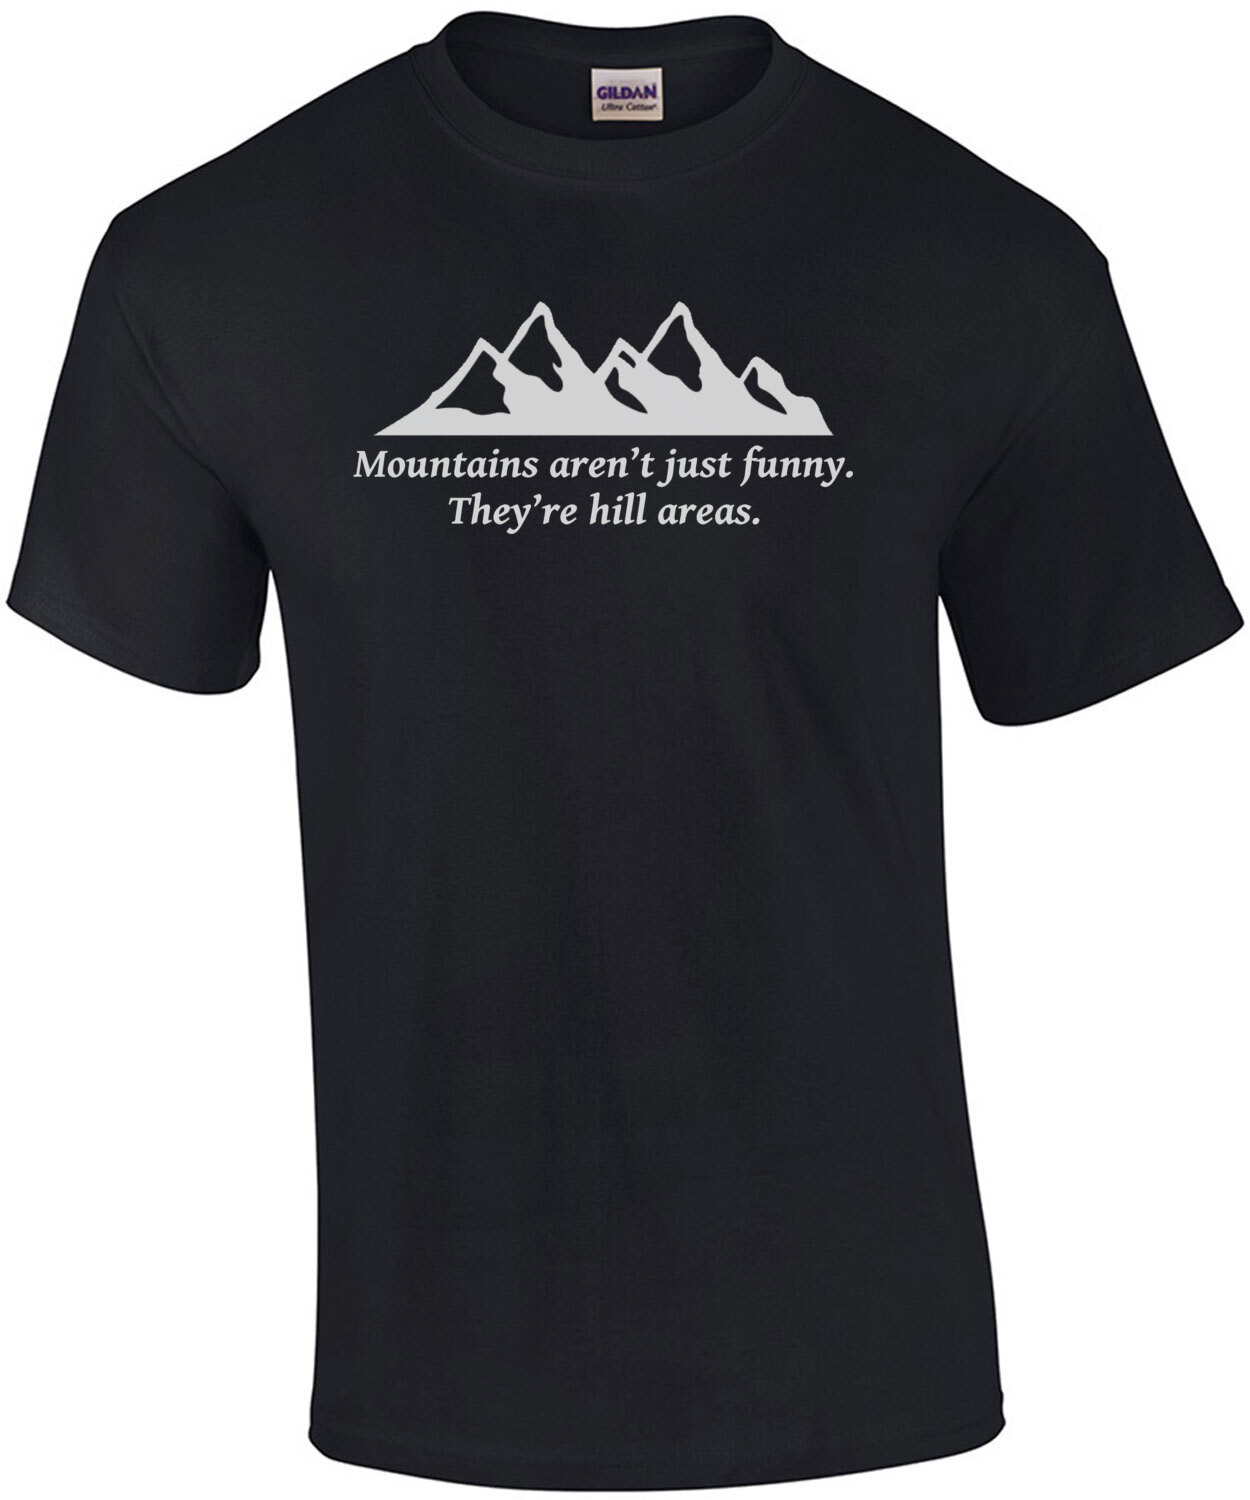 Mountains aren't just funny - they're hill areas - dad joke corny pun t-shirt